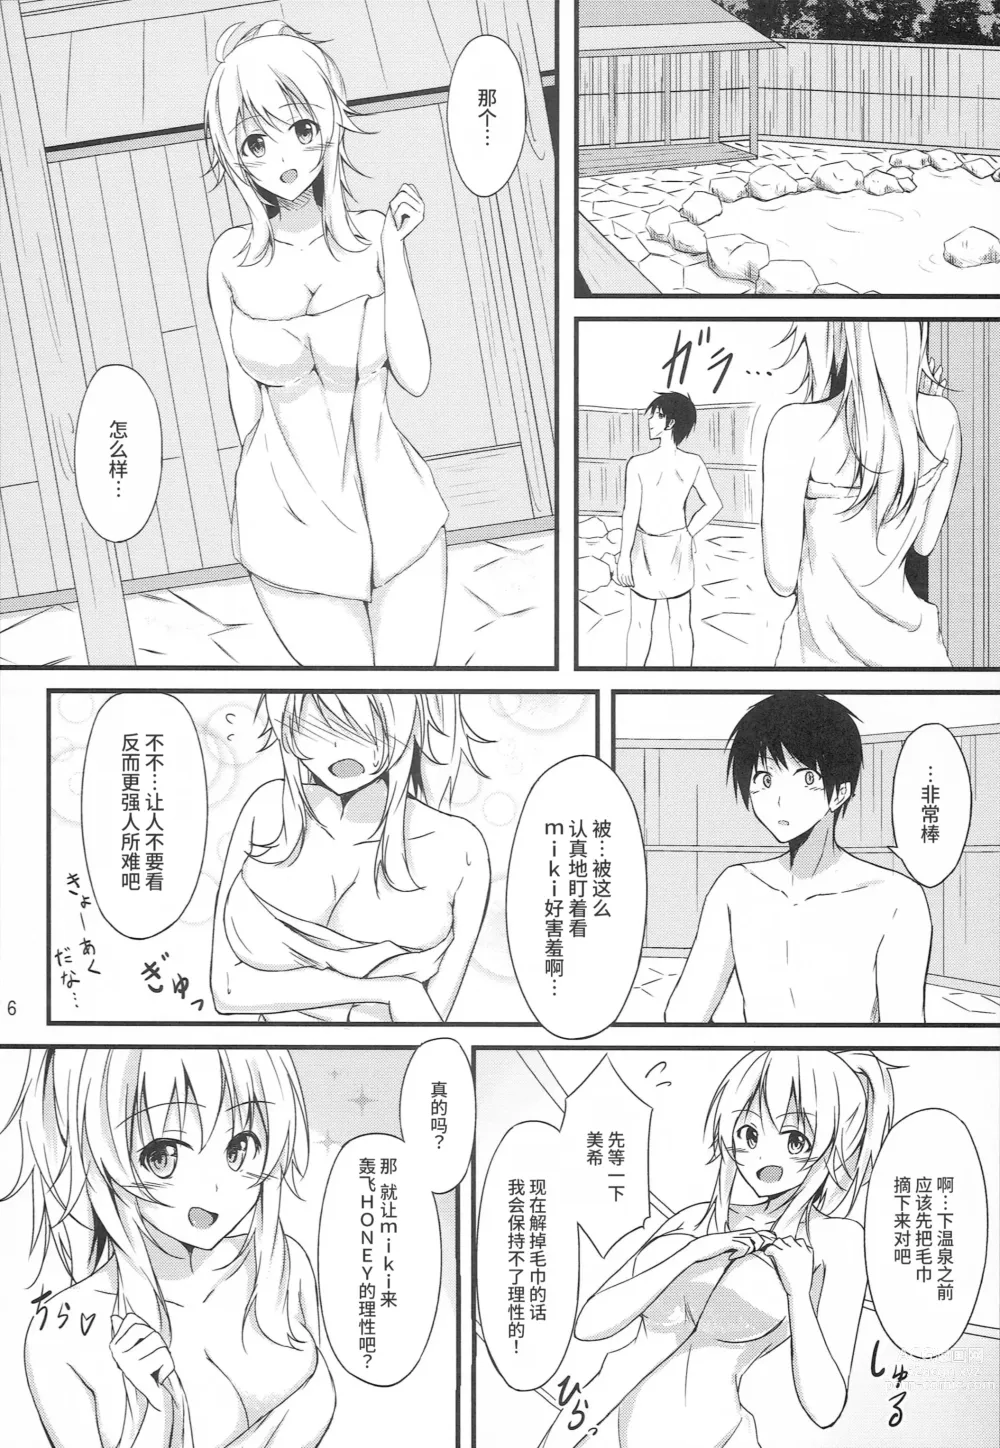 Page 4 of doujinshi Miki to Honey no DeepLove